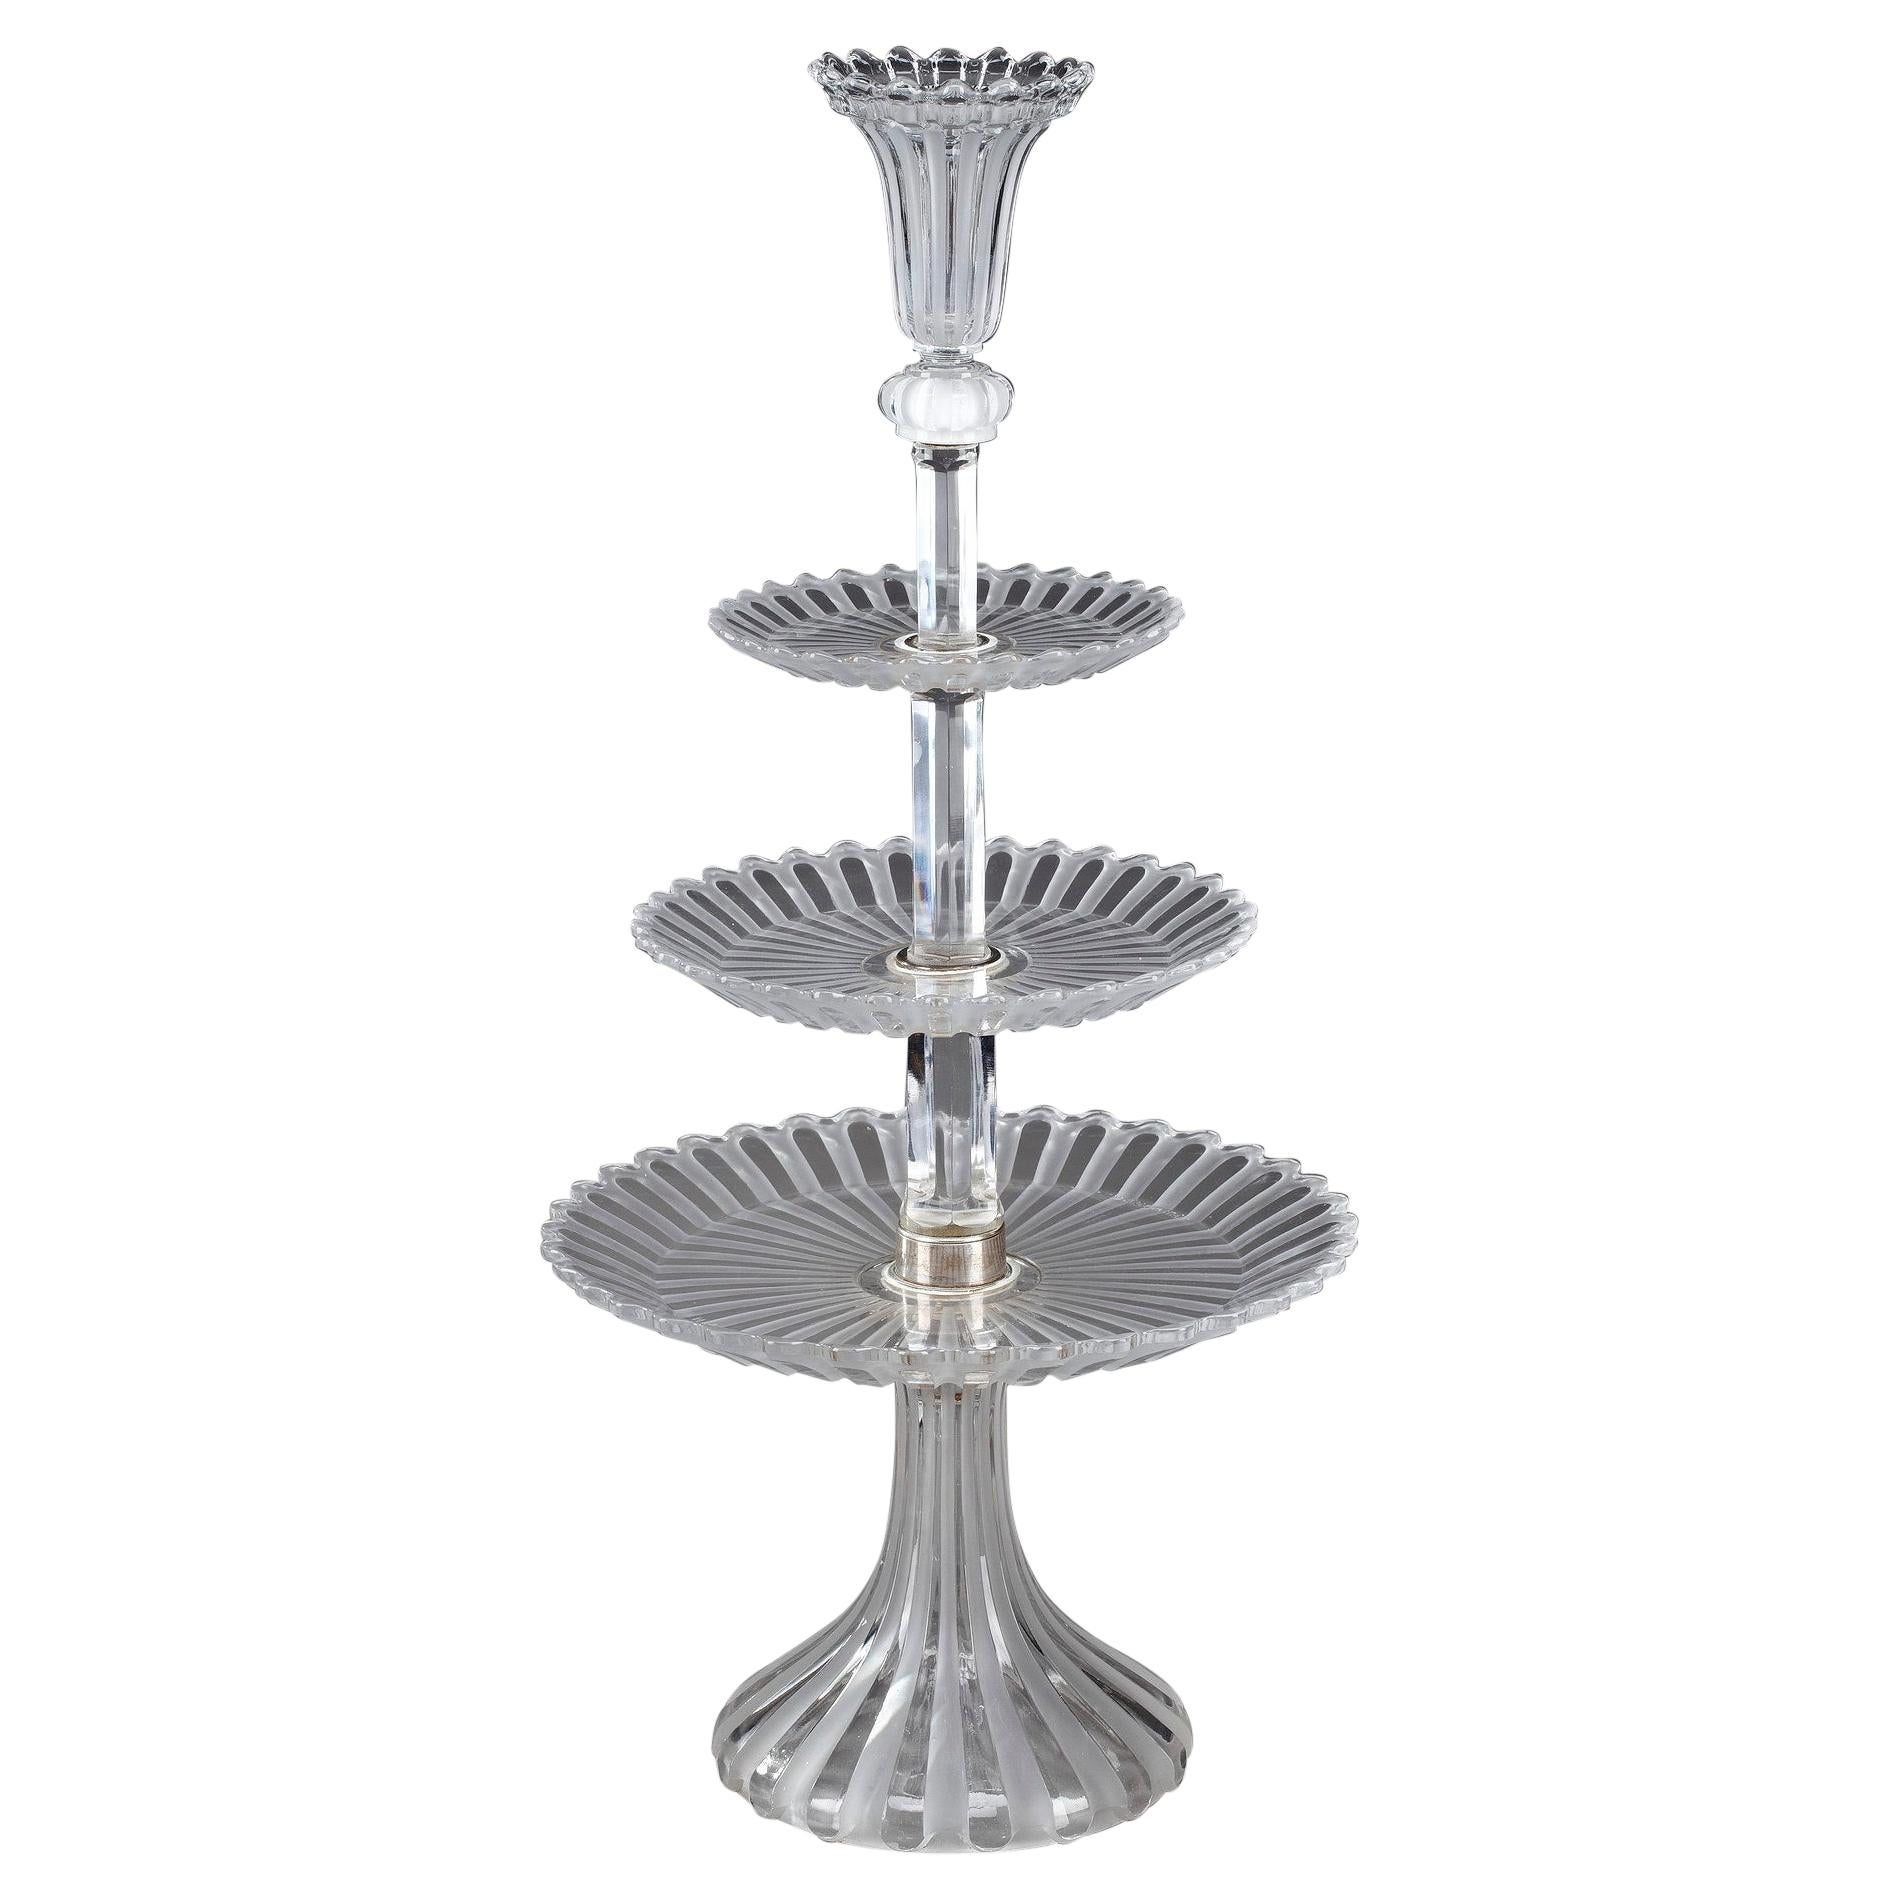 Baccarat Crystal Centerpiece, Late 19th Century Period